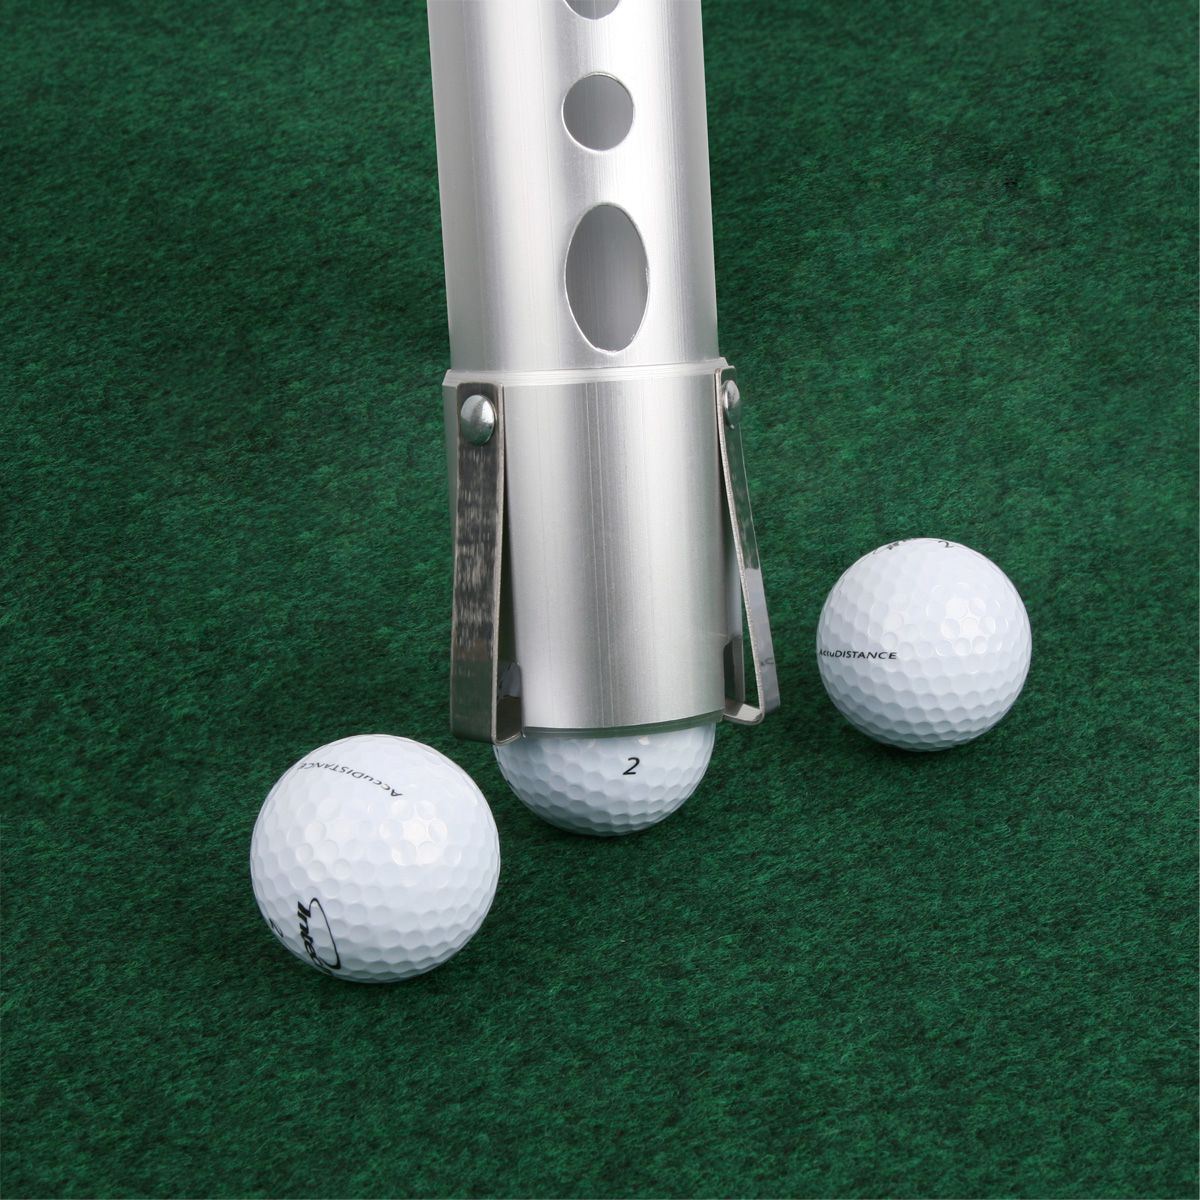 an Intech Golf Ball Shag Bag pressing down on the middle of 3 white golf balls on a green surface